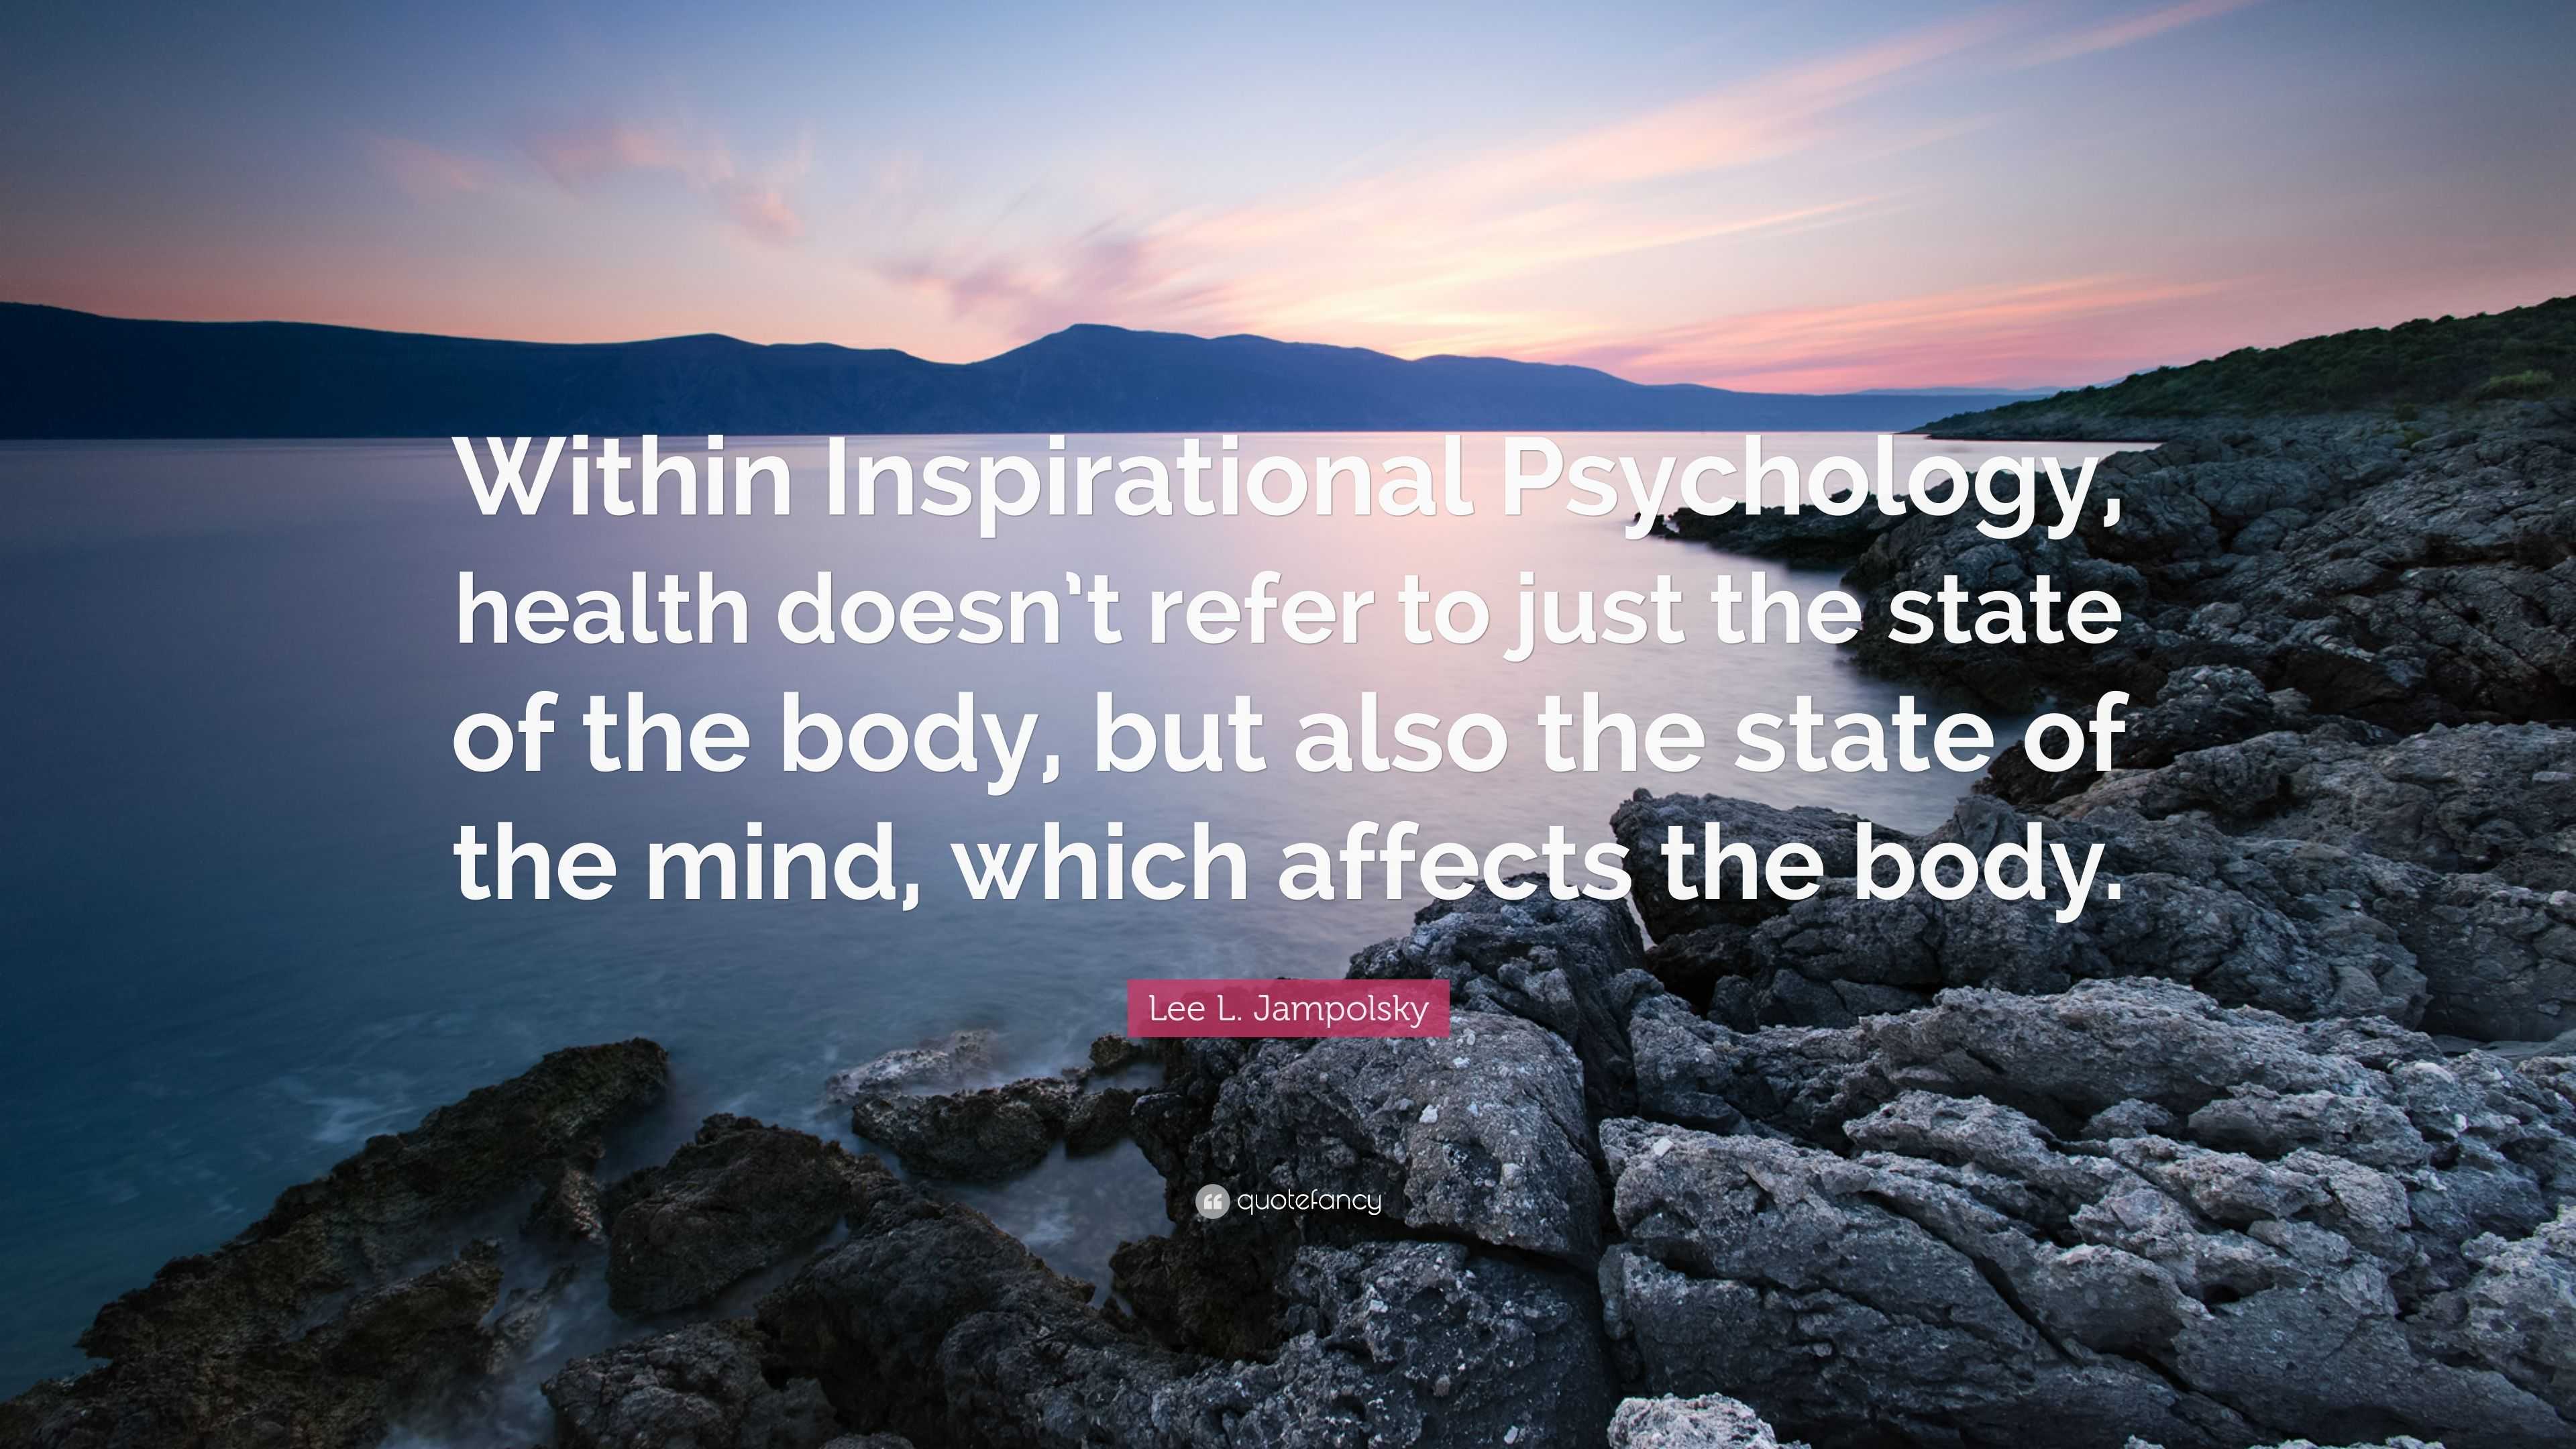 Lee L. Jampolsky Quote: “Within Inspirational Psychology, health doesn ...